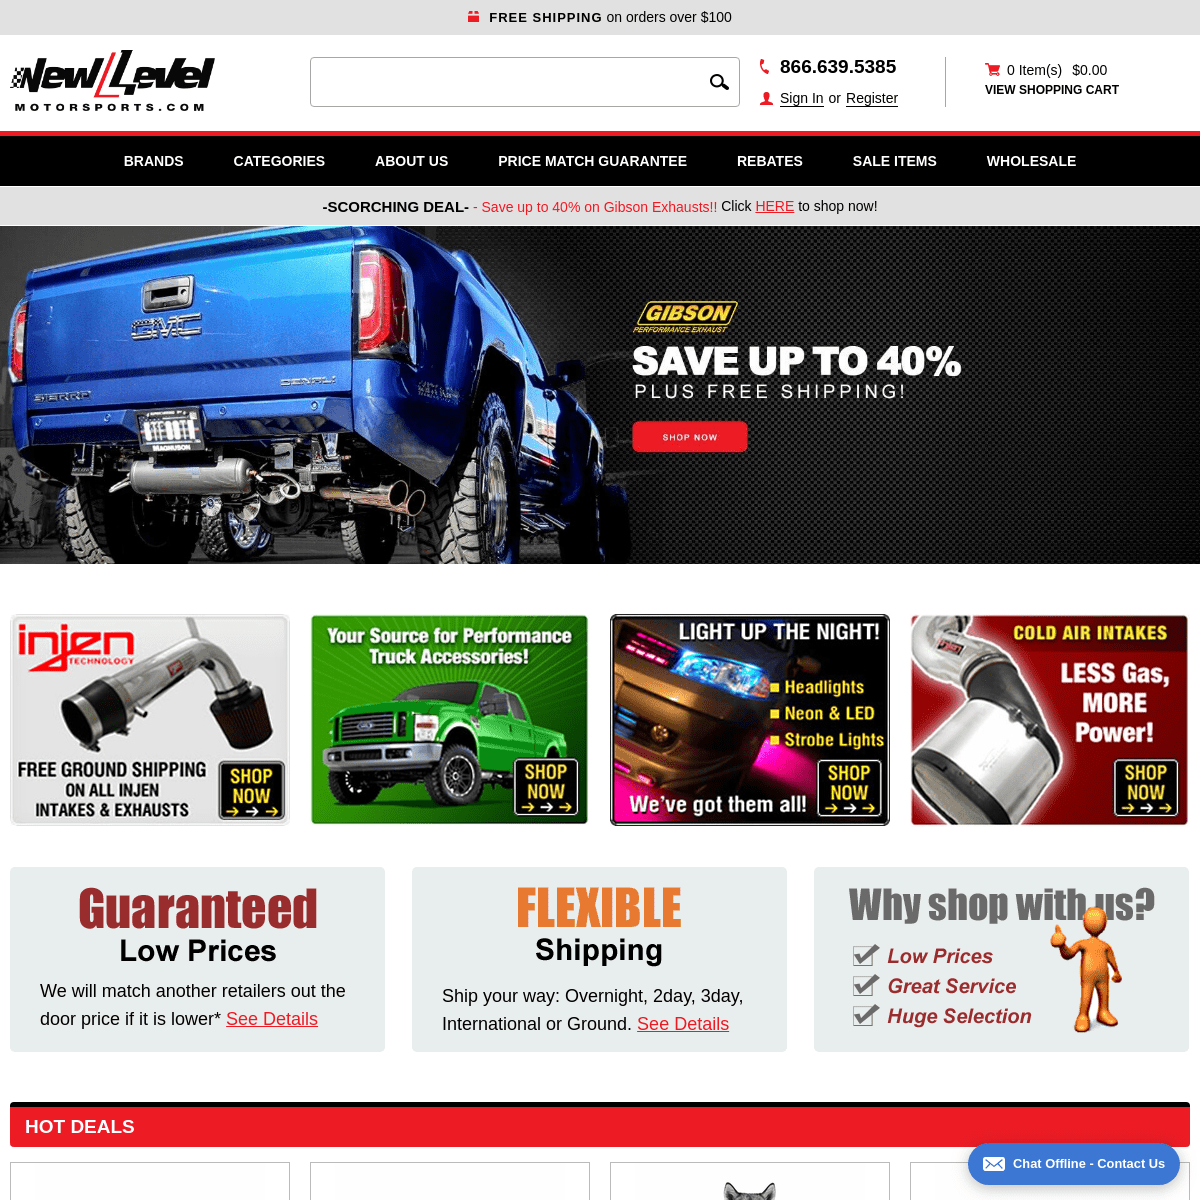 New Level Motor Sports - Car & Truck Accessories, Cold Air Intakes, Flash Tuners, Headers Exhaust & More